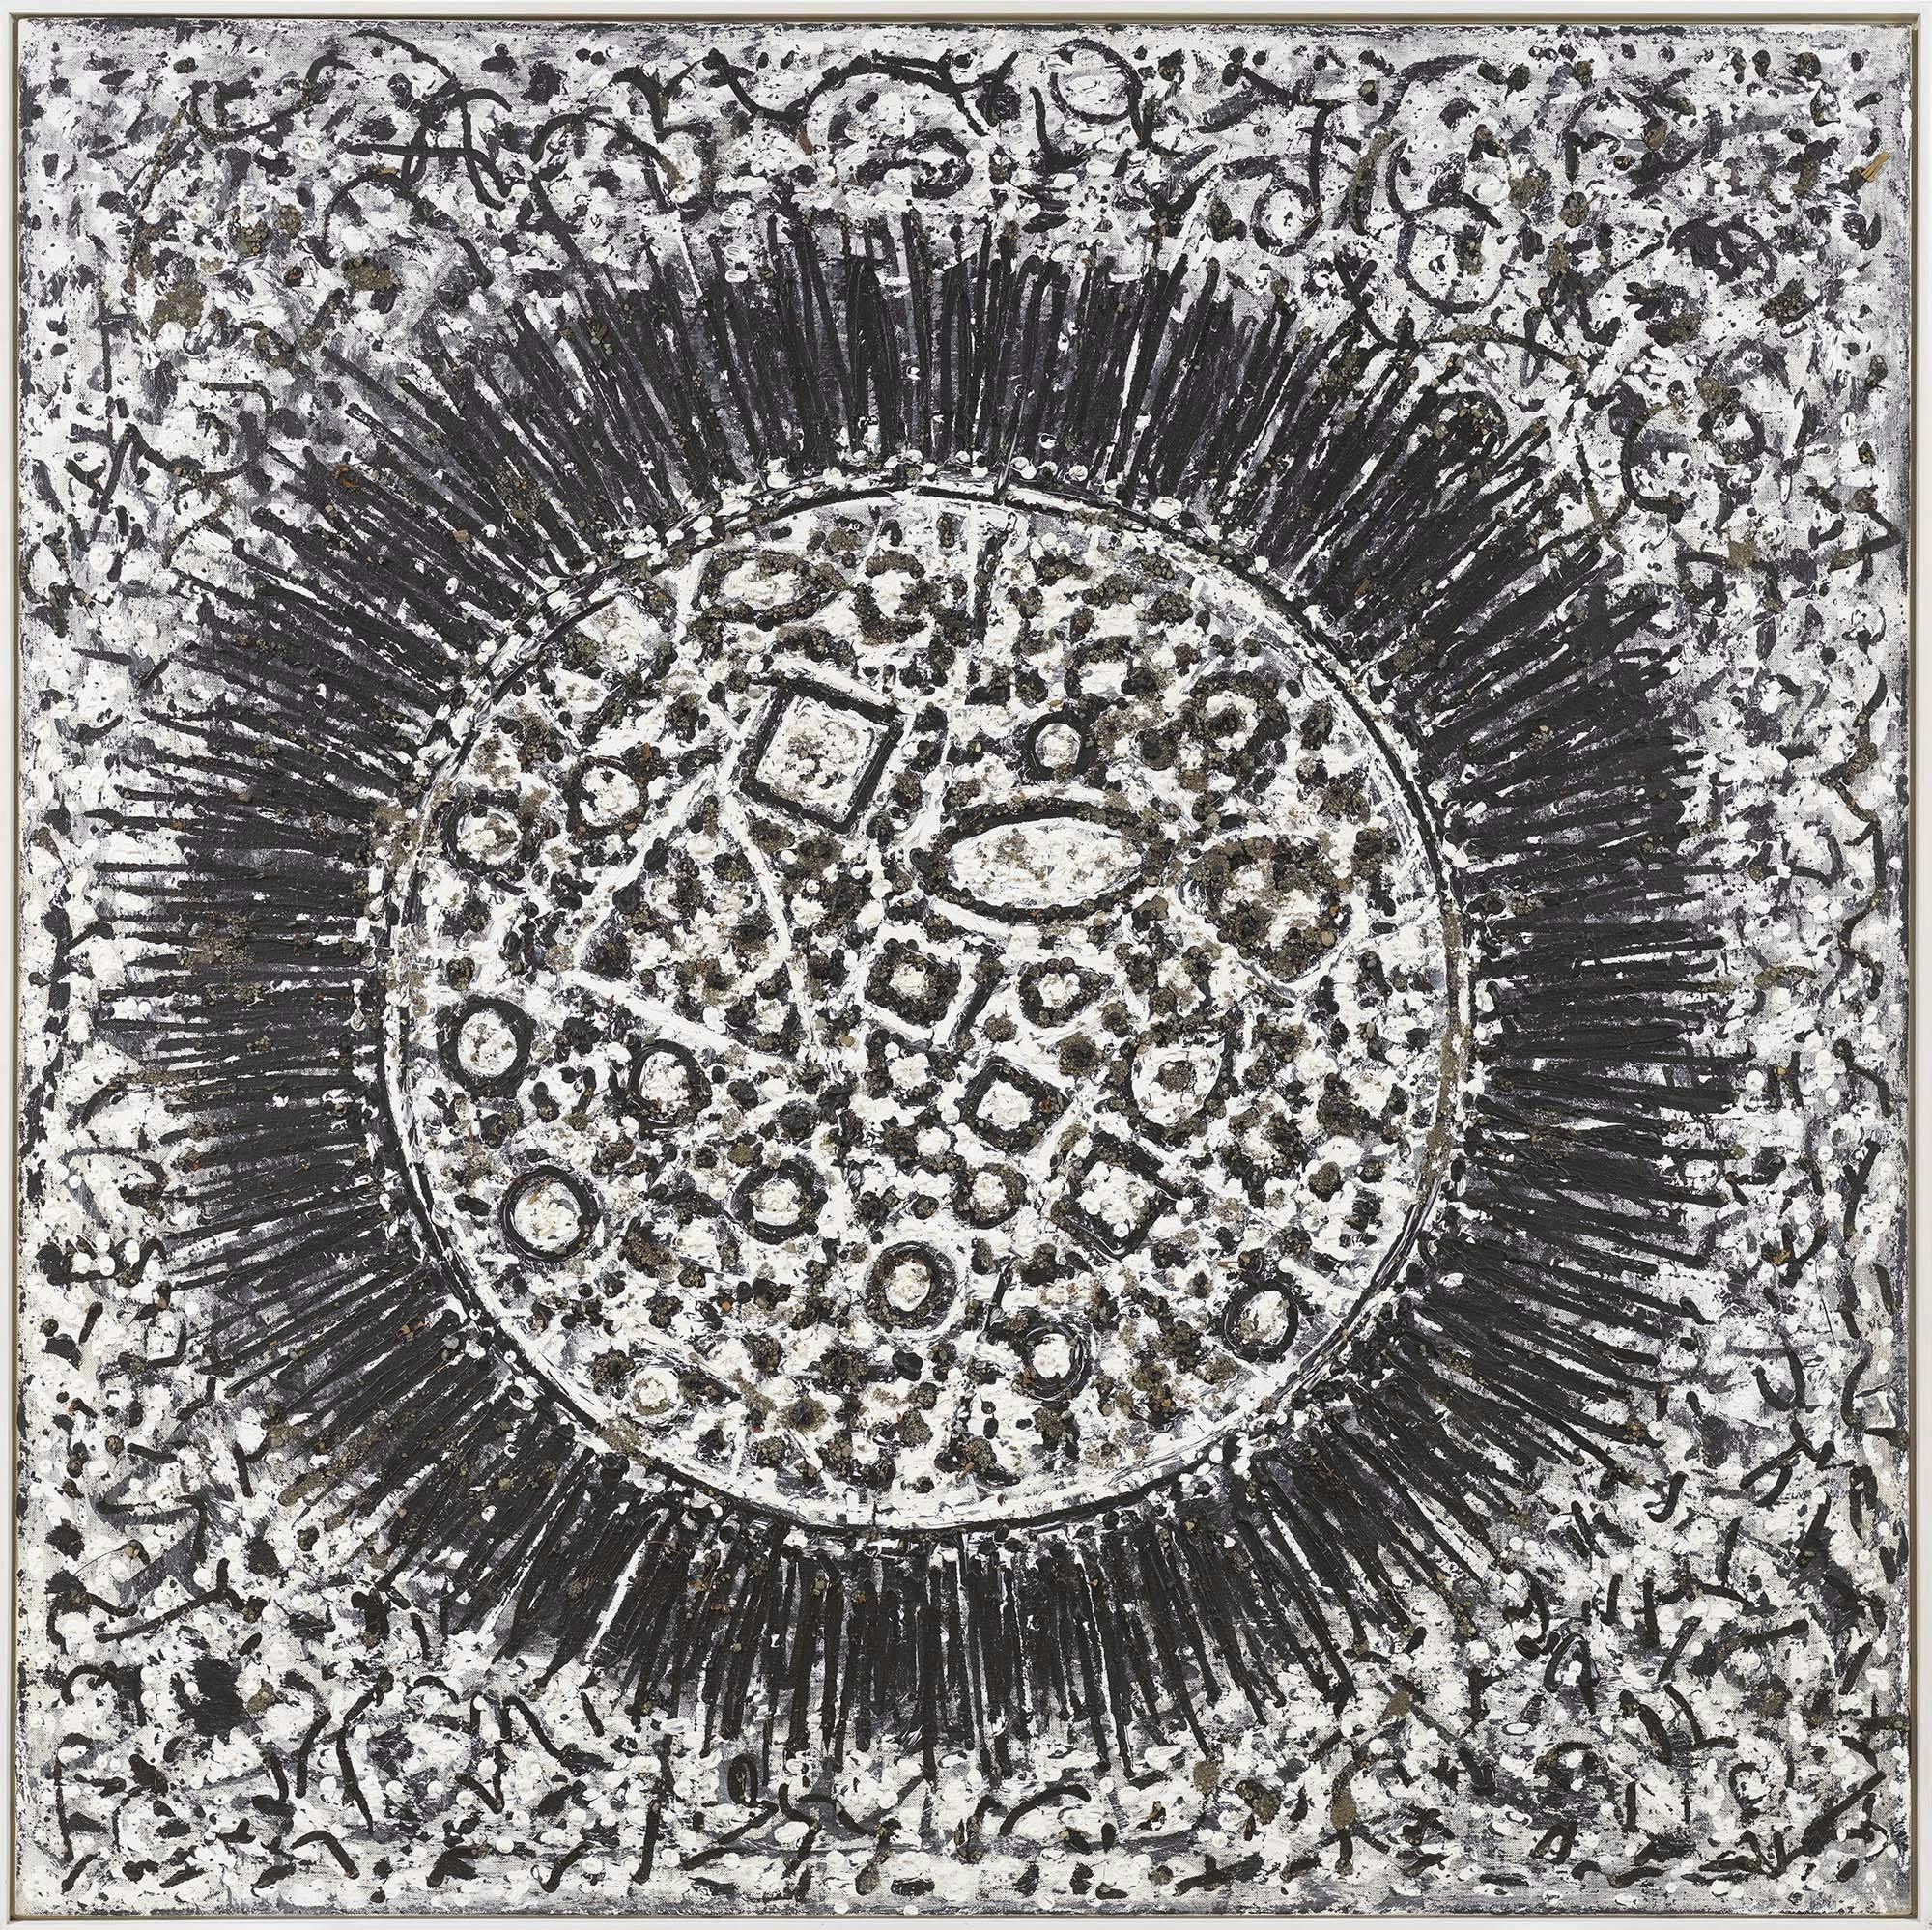 Burning Black Circle
1978–80
Acrylic gravel, wood chips, leaves, and sticks on linen
80 x 80 in. (203.2 x 203.2 cm)
 – The Richard Pousette-Dart Foundation